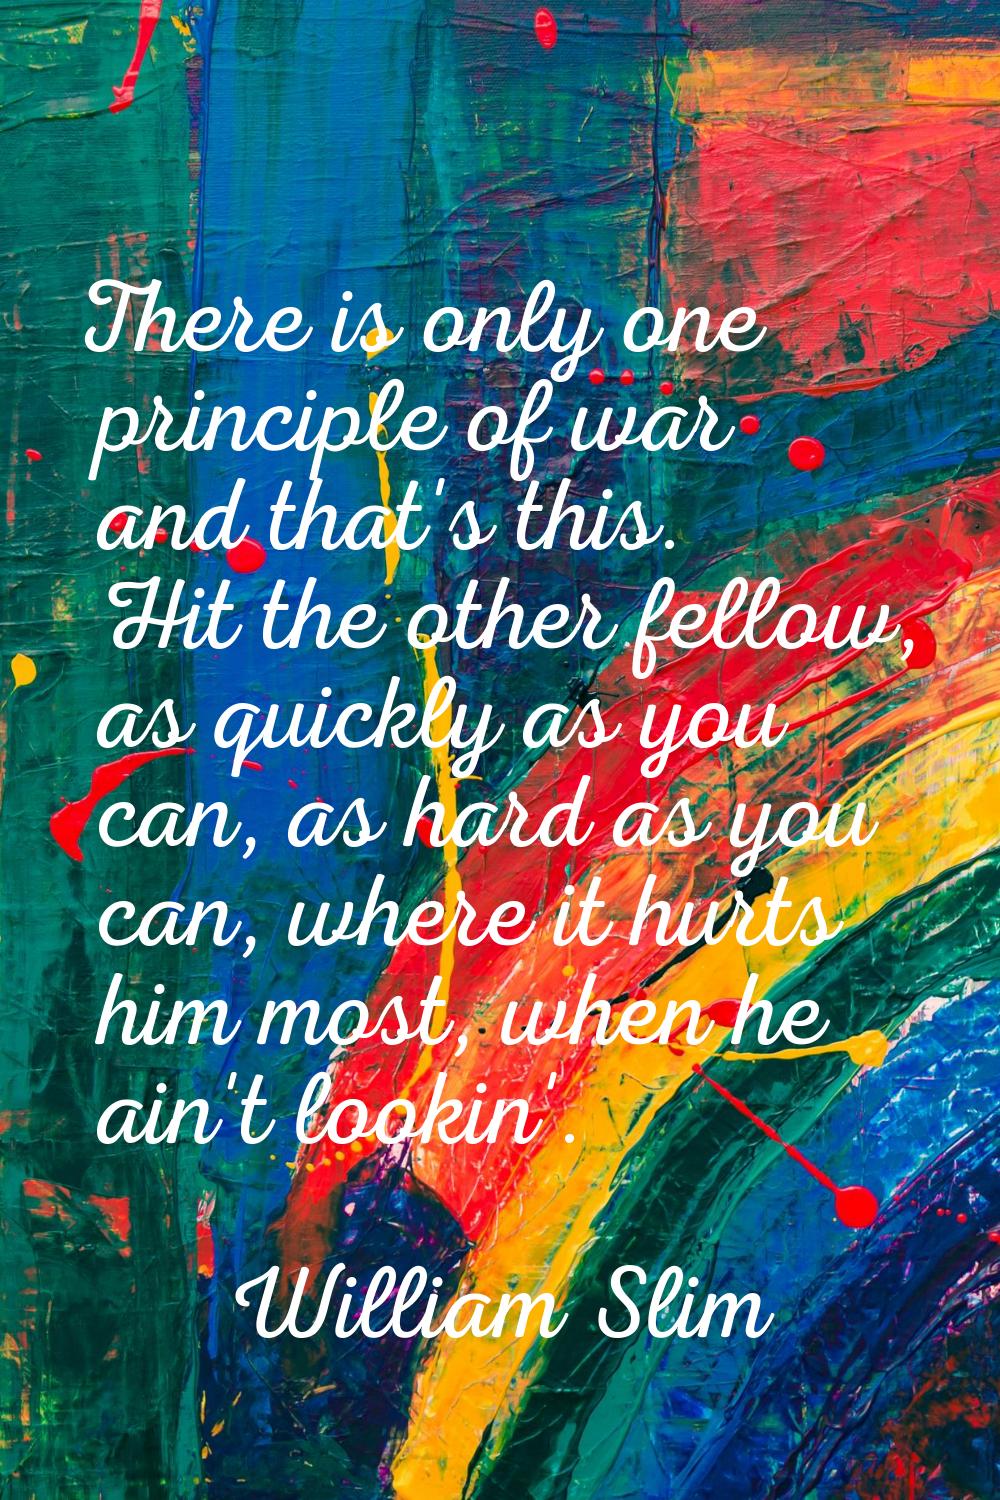 There is only one principle of war and that's this. Hit the other fellow, as quickly as you can, as